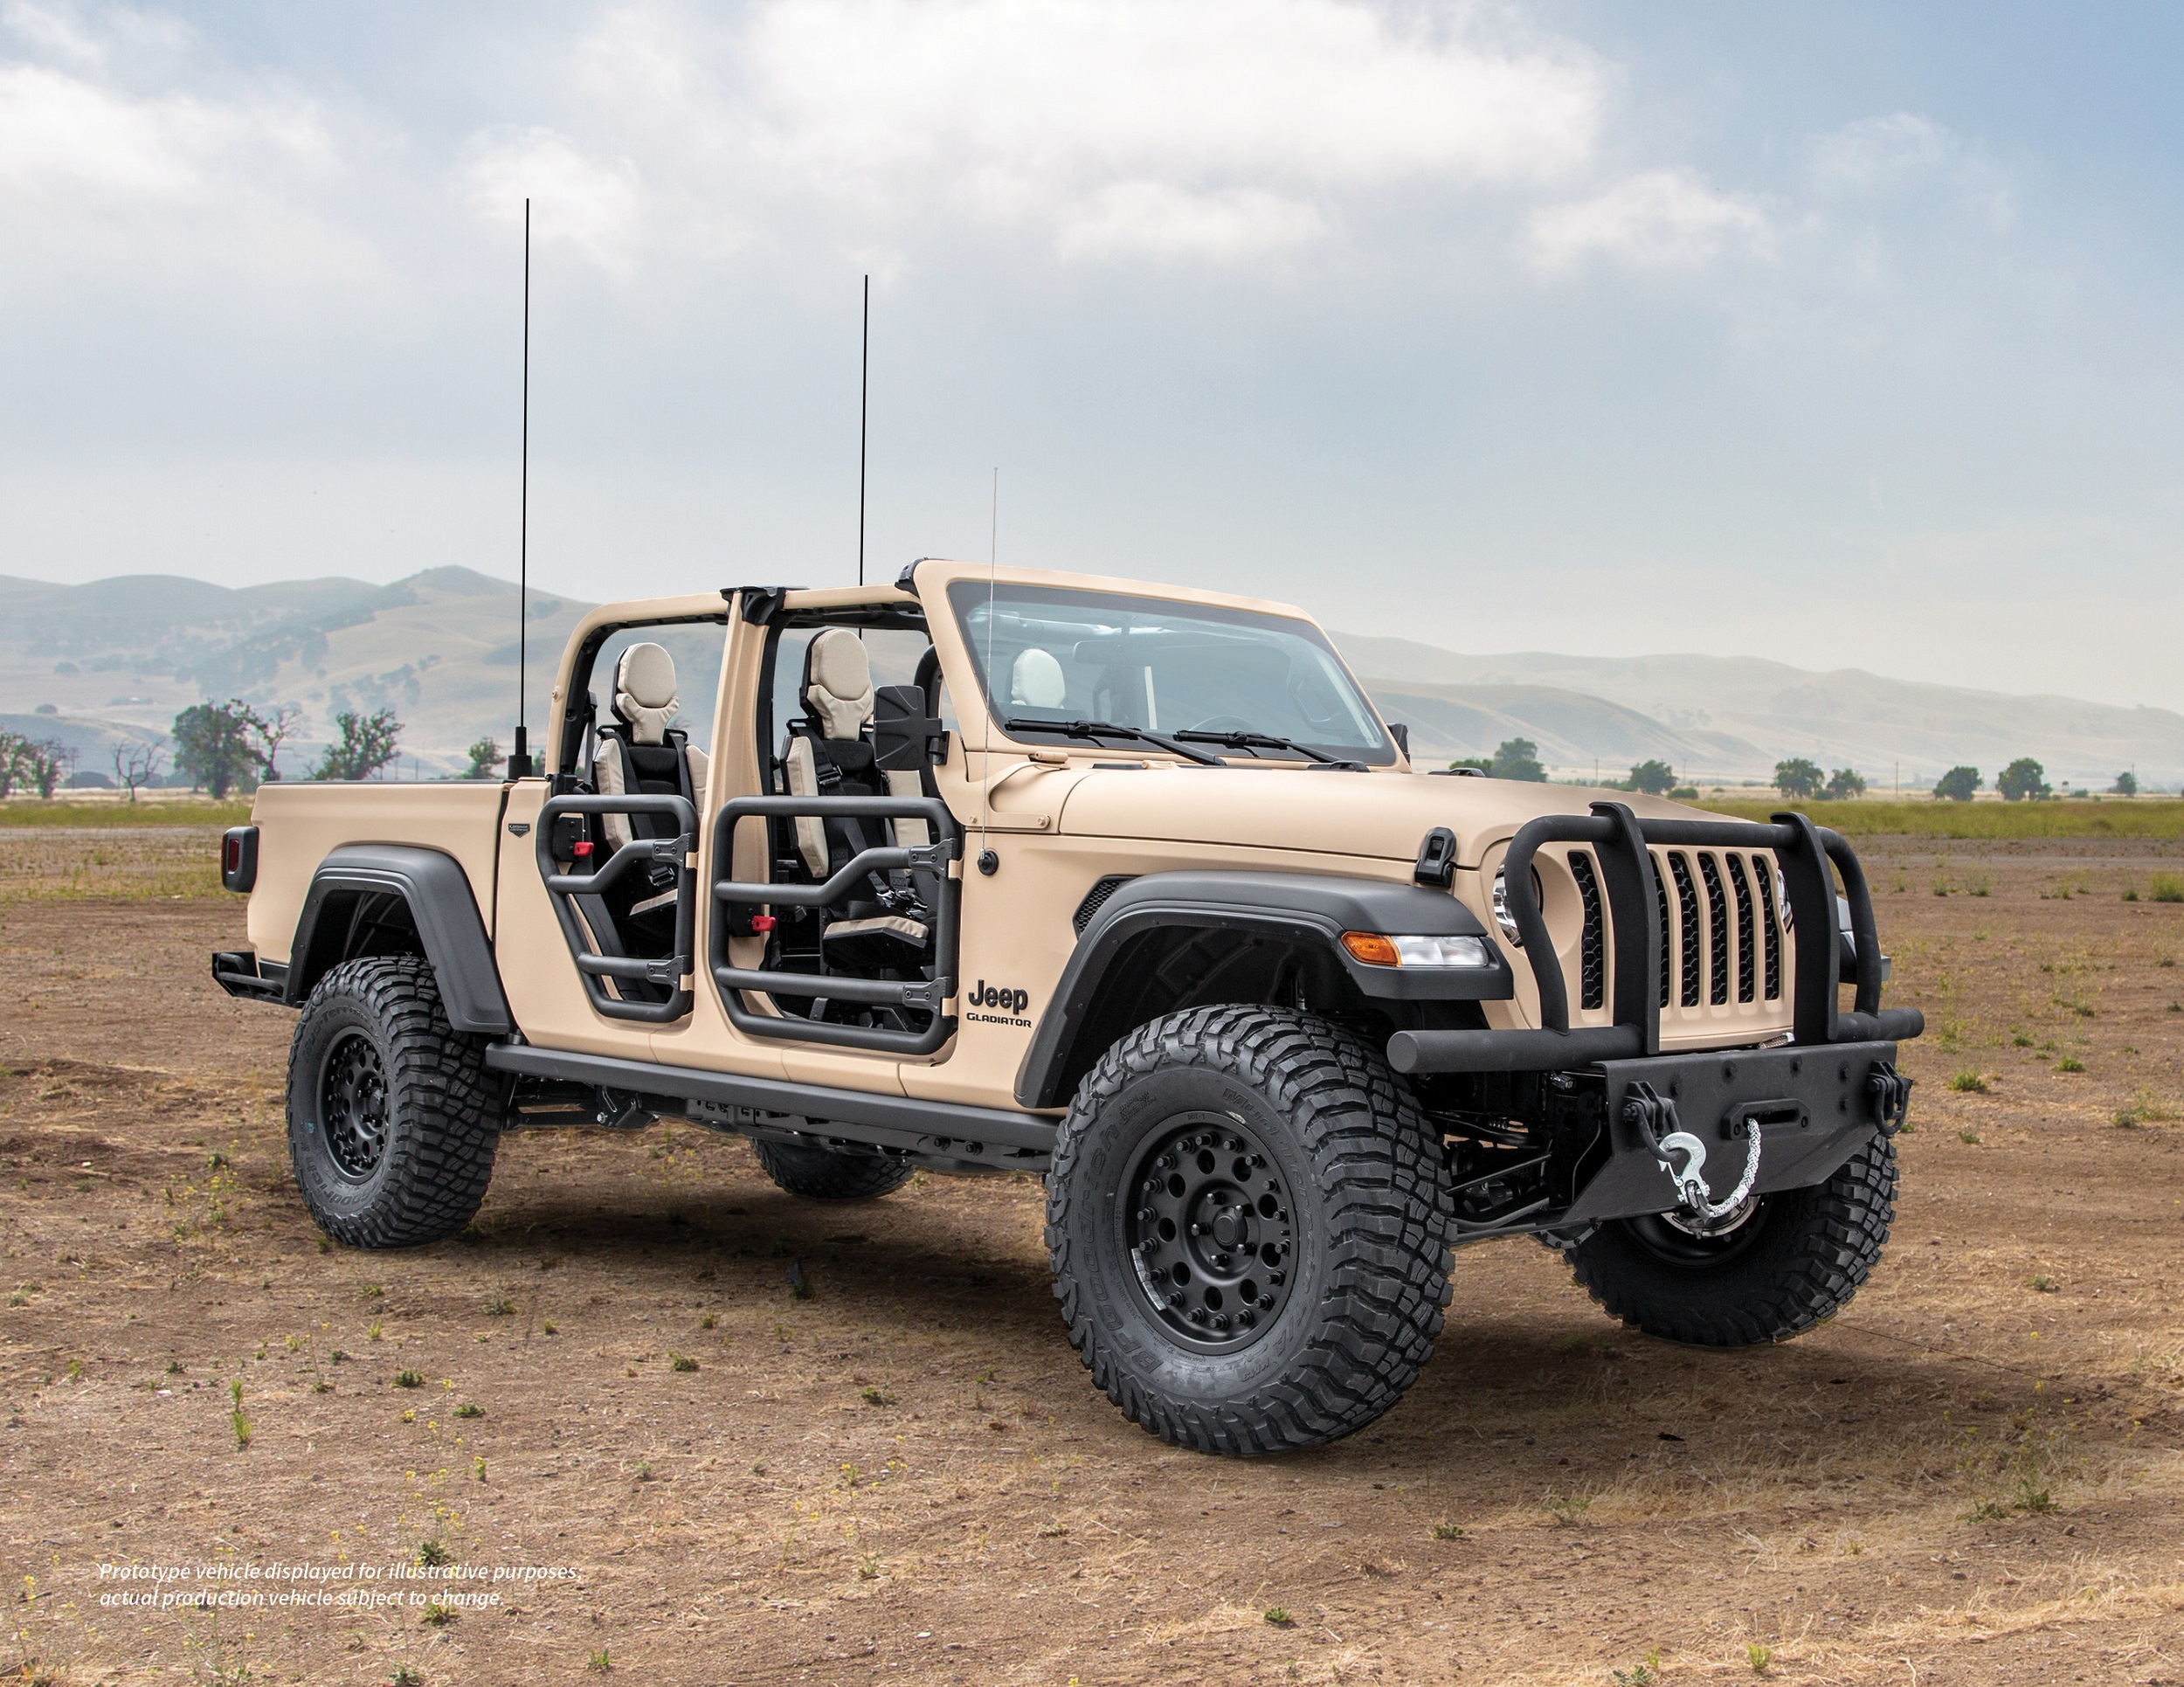 2019-jeep-gladiator-mxt-military-truck-concept-unveiled-autoblog